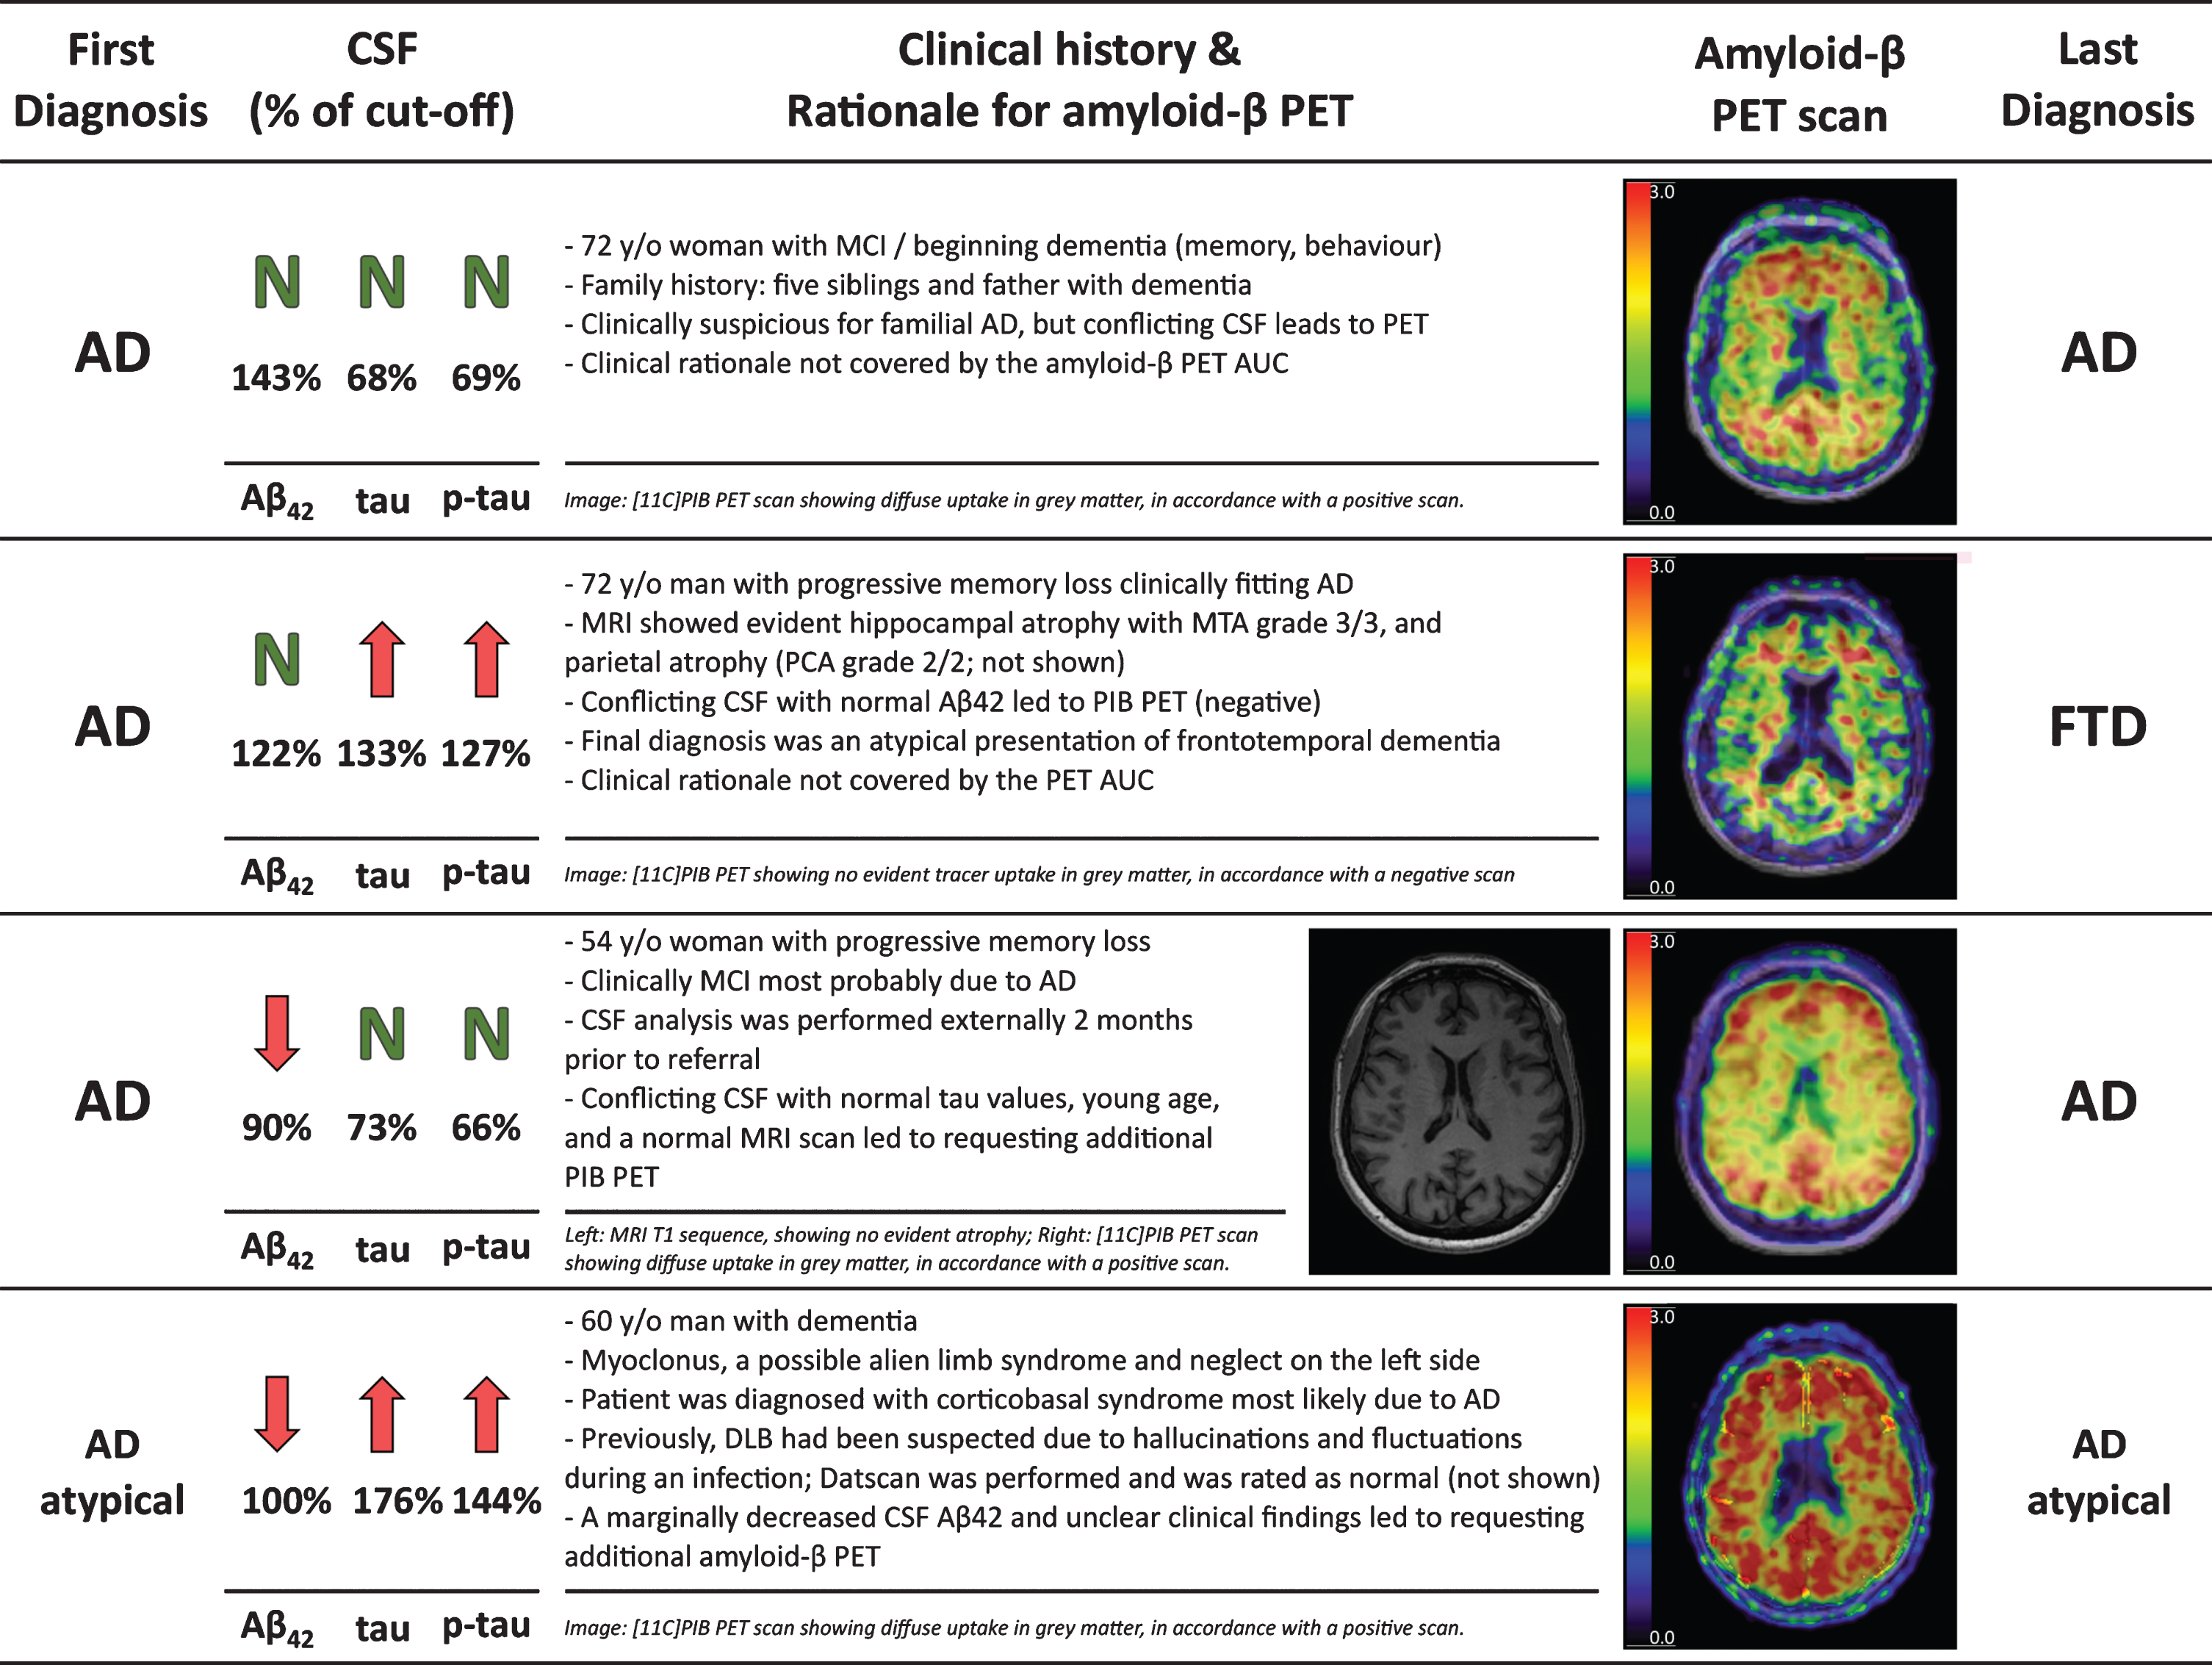 Four case reports illustrating the clinical reasoning for requesting an additional amyloid-β PET.